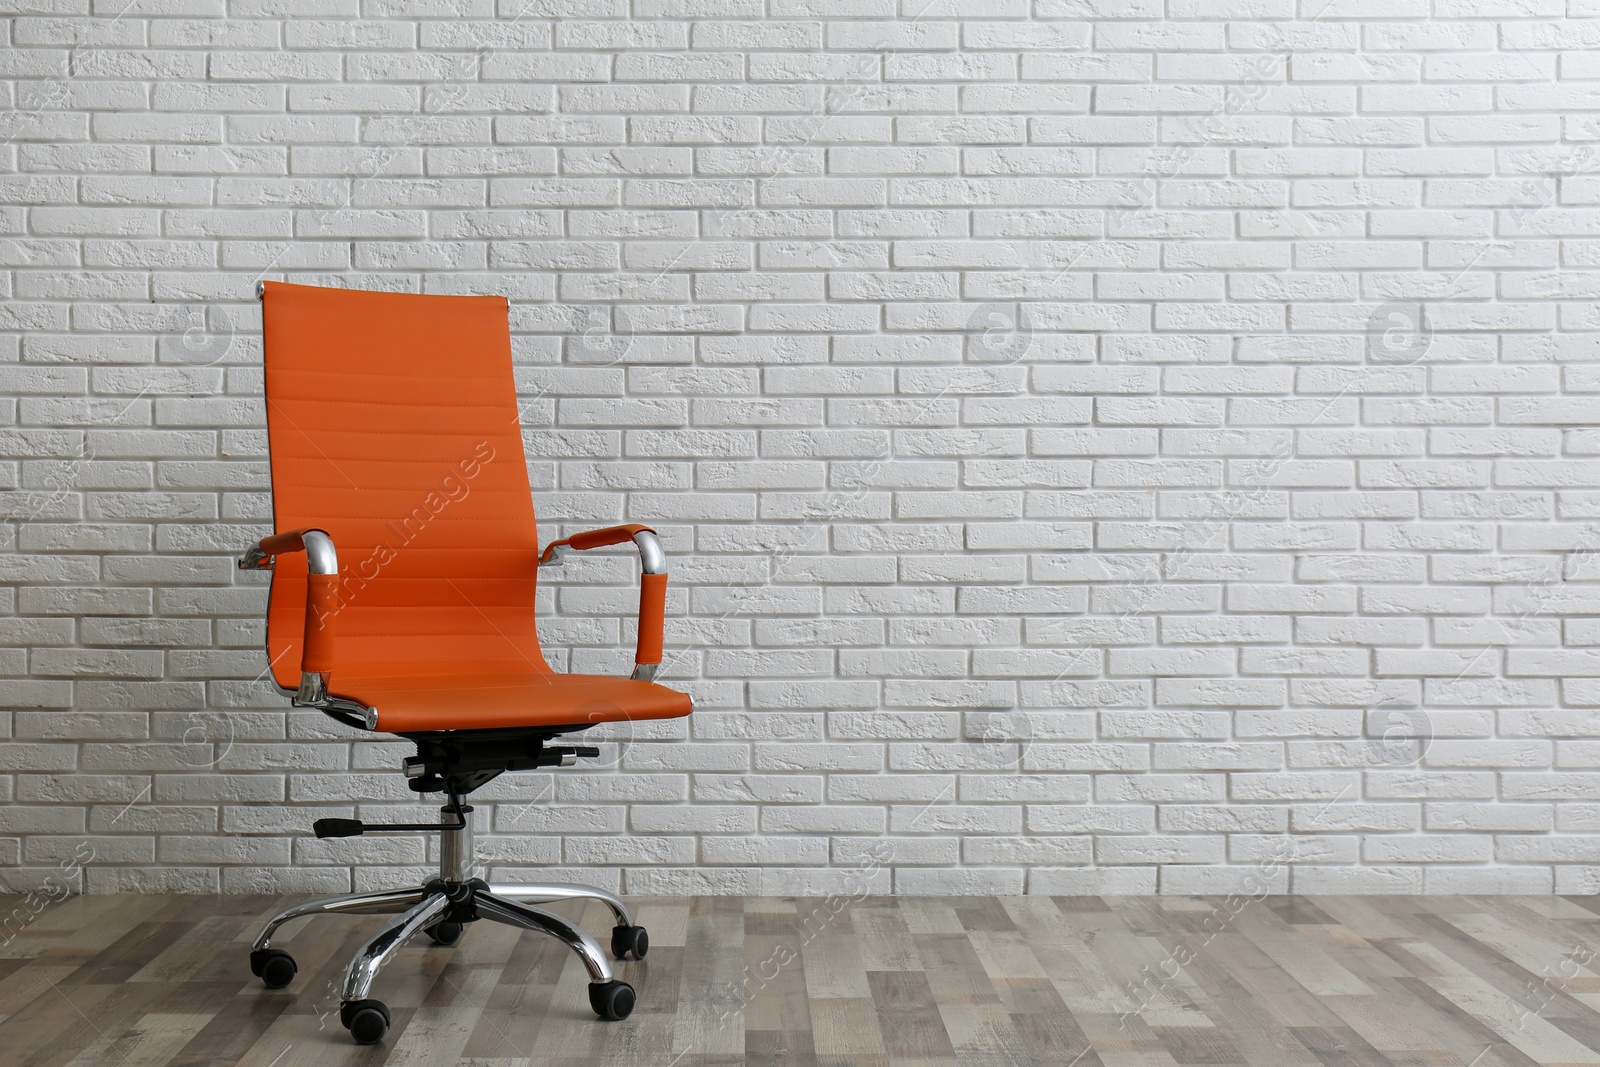 Photo of Comfortable office chair near white brick wall indoors. Space for text